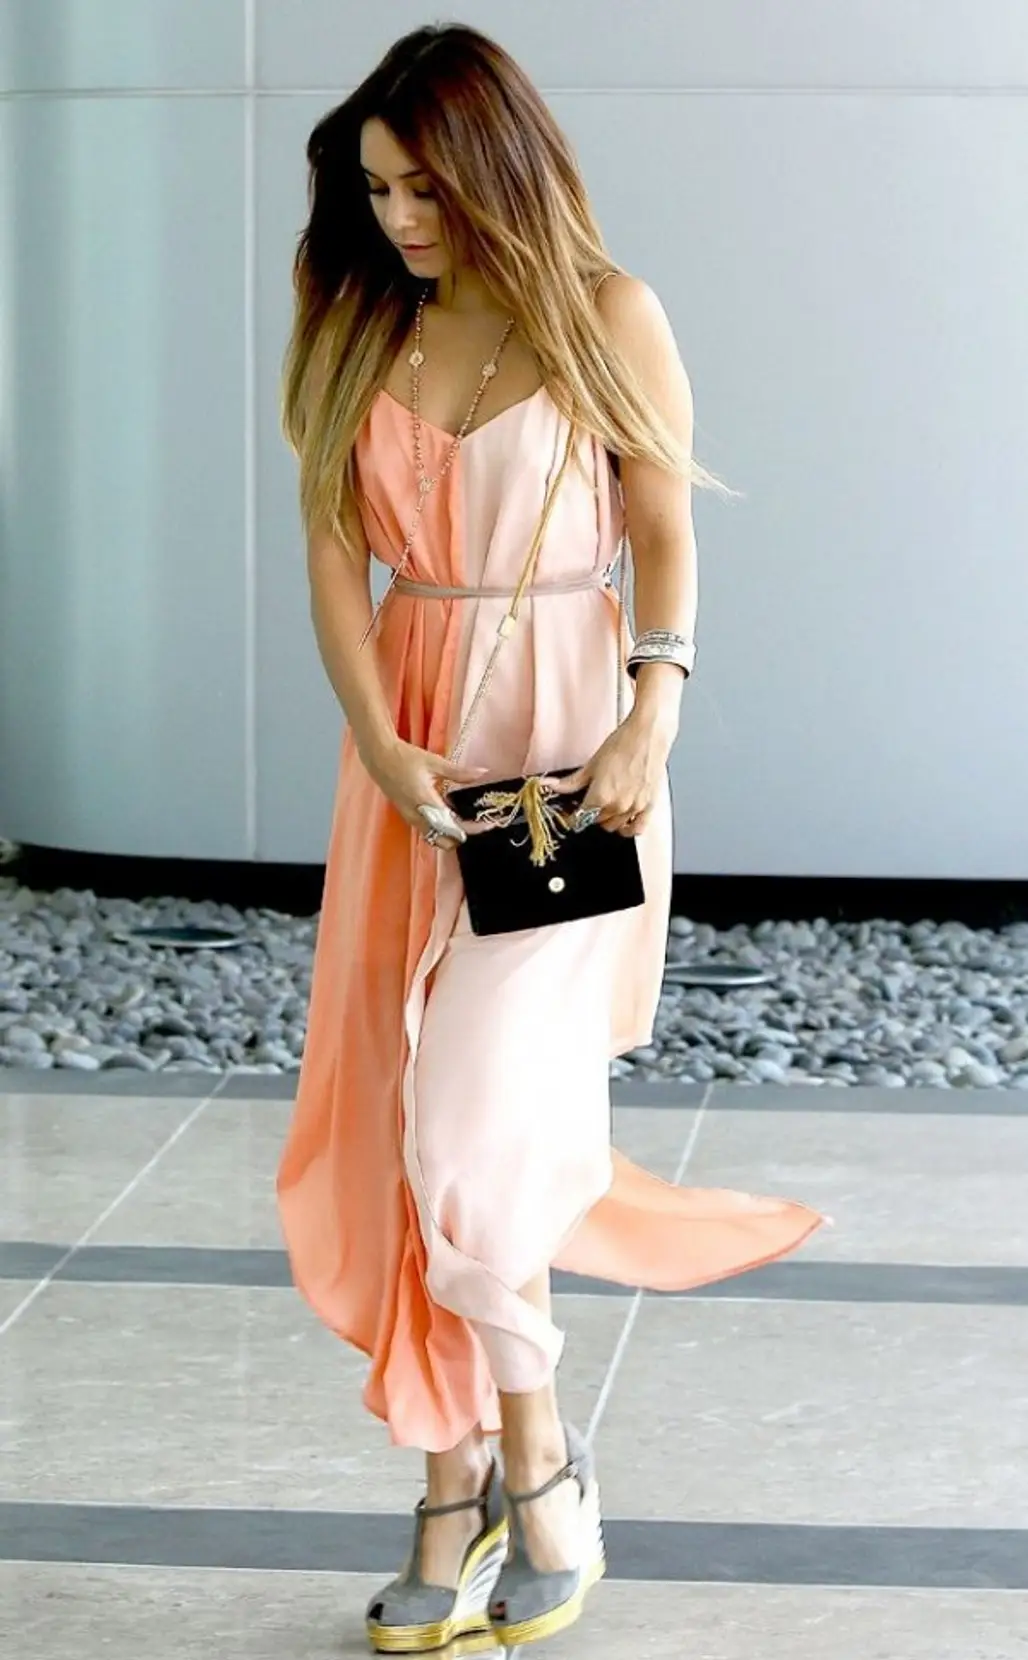 Peach Dress and Wedges